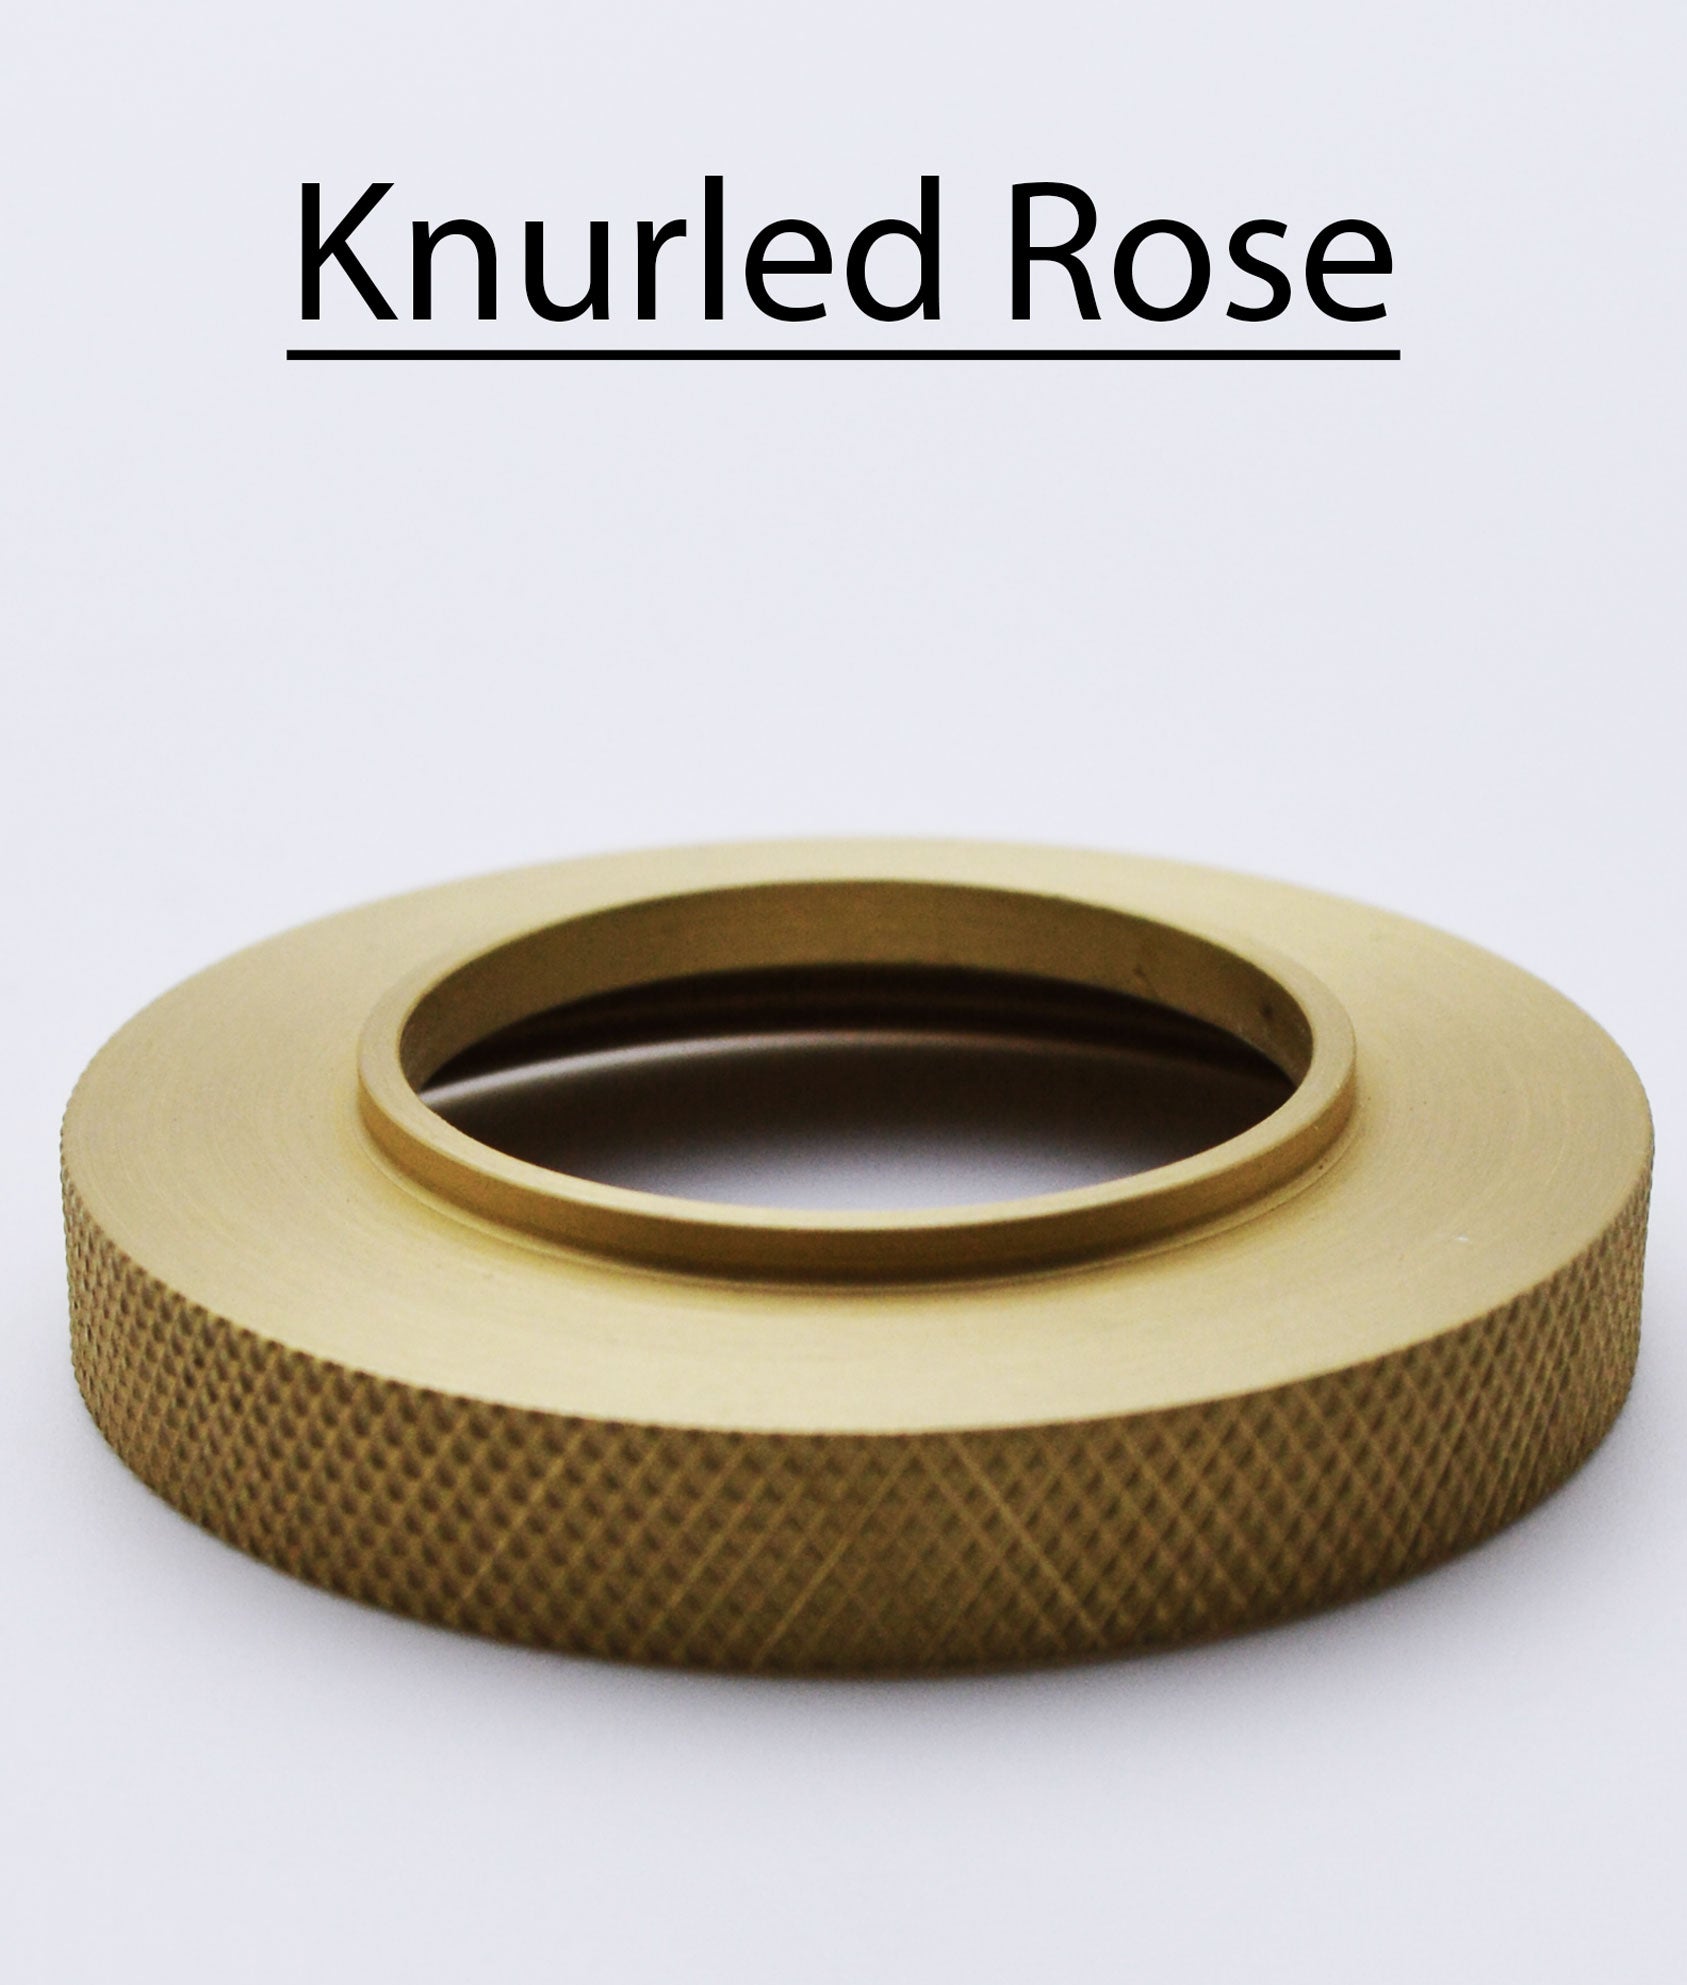 Bjorn Slotted Escutcheon with Knurled Rose